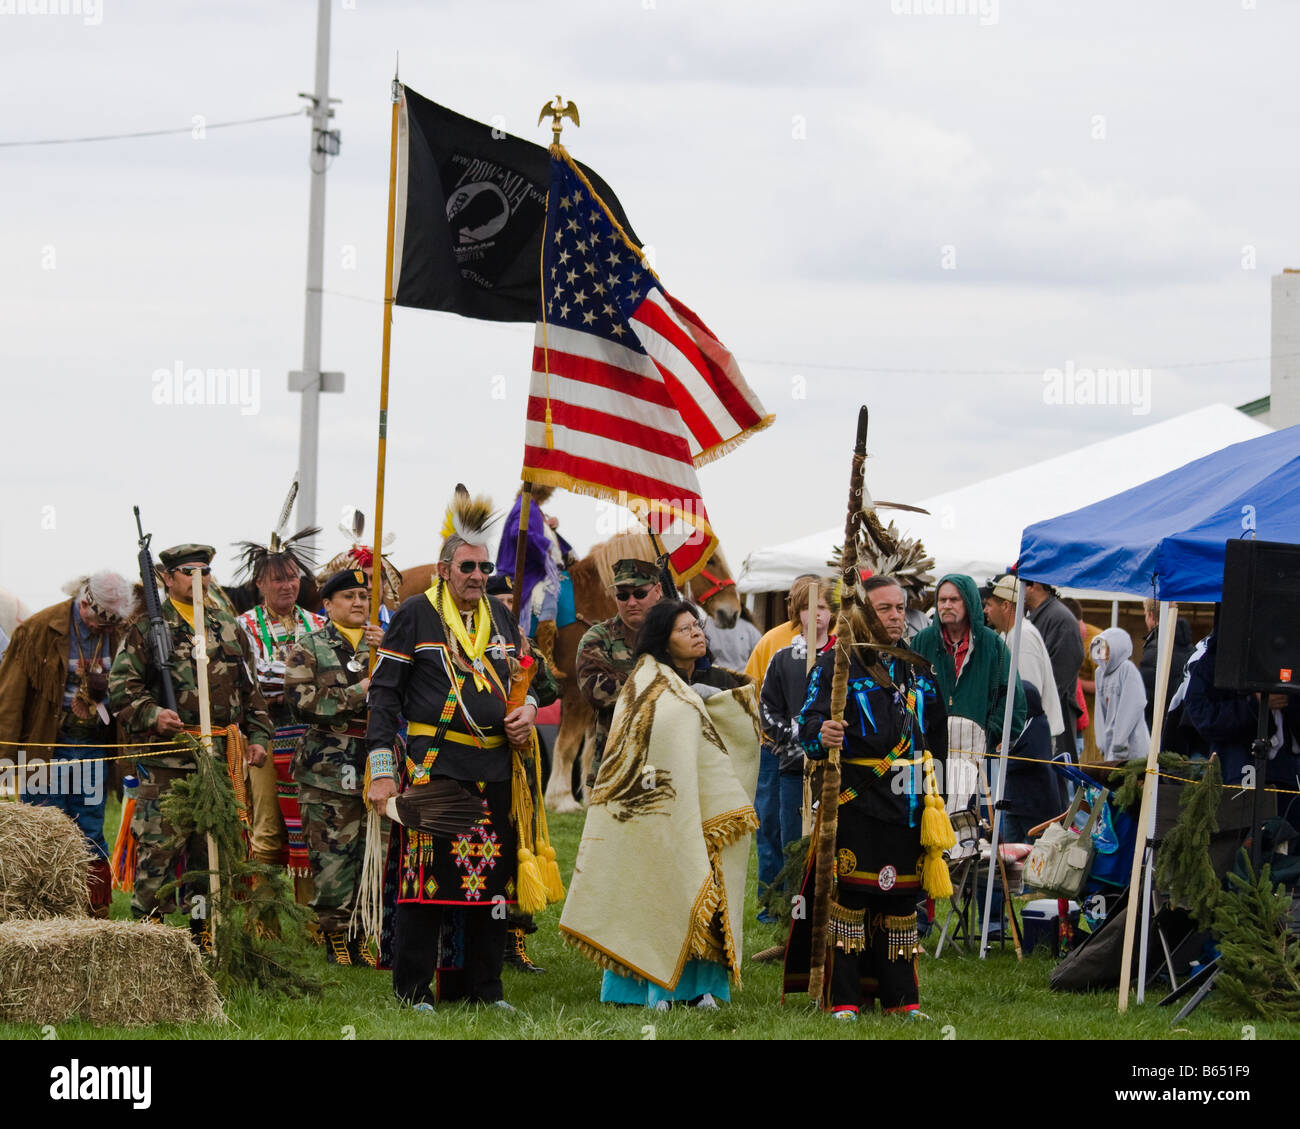 Native Americans at the Healing Horse Spirit PowWow in Mt. Airy, Maryland carry an American flag POW-MIA flag.  They standy read Stock Photo